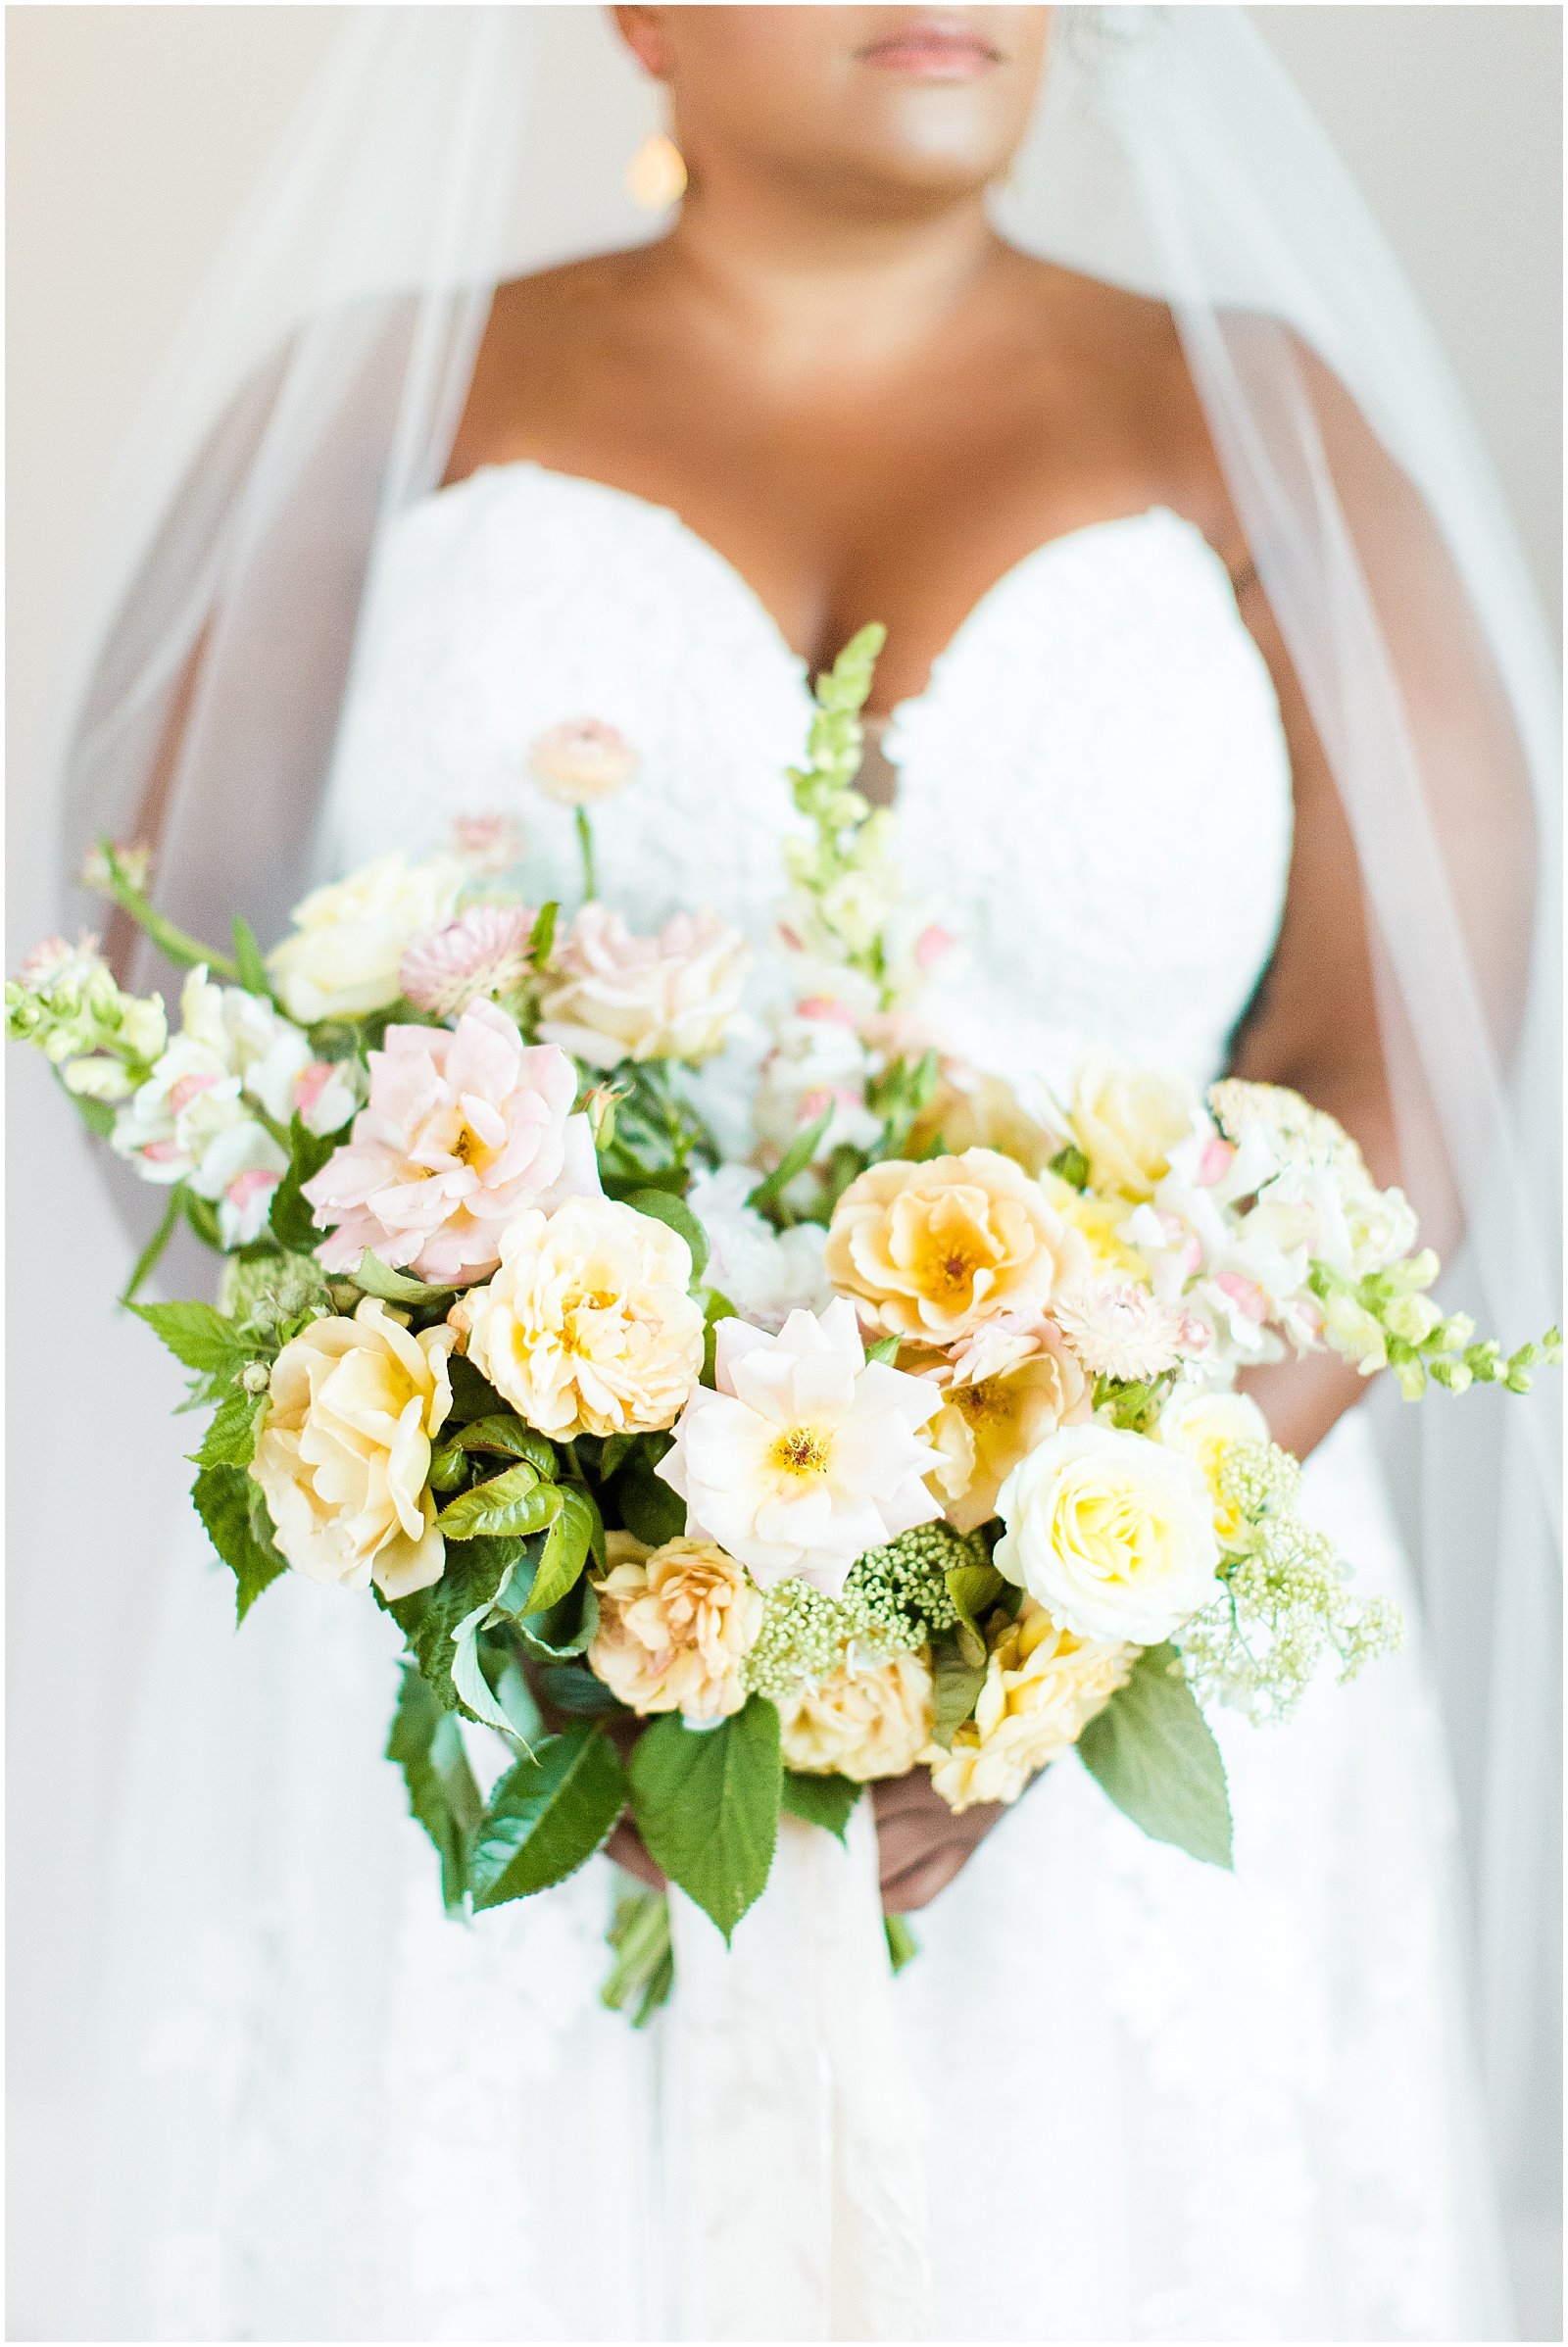 Bret and Brandie Photography | Styled Shoot at White Chateau | Blog 0009.jpg